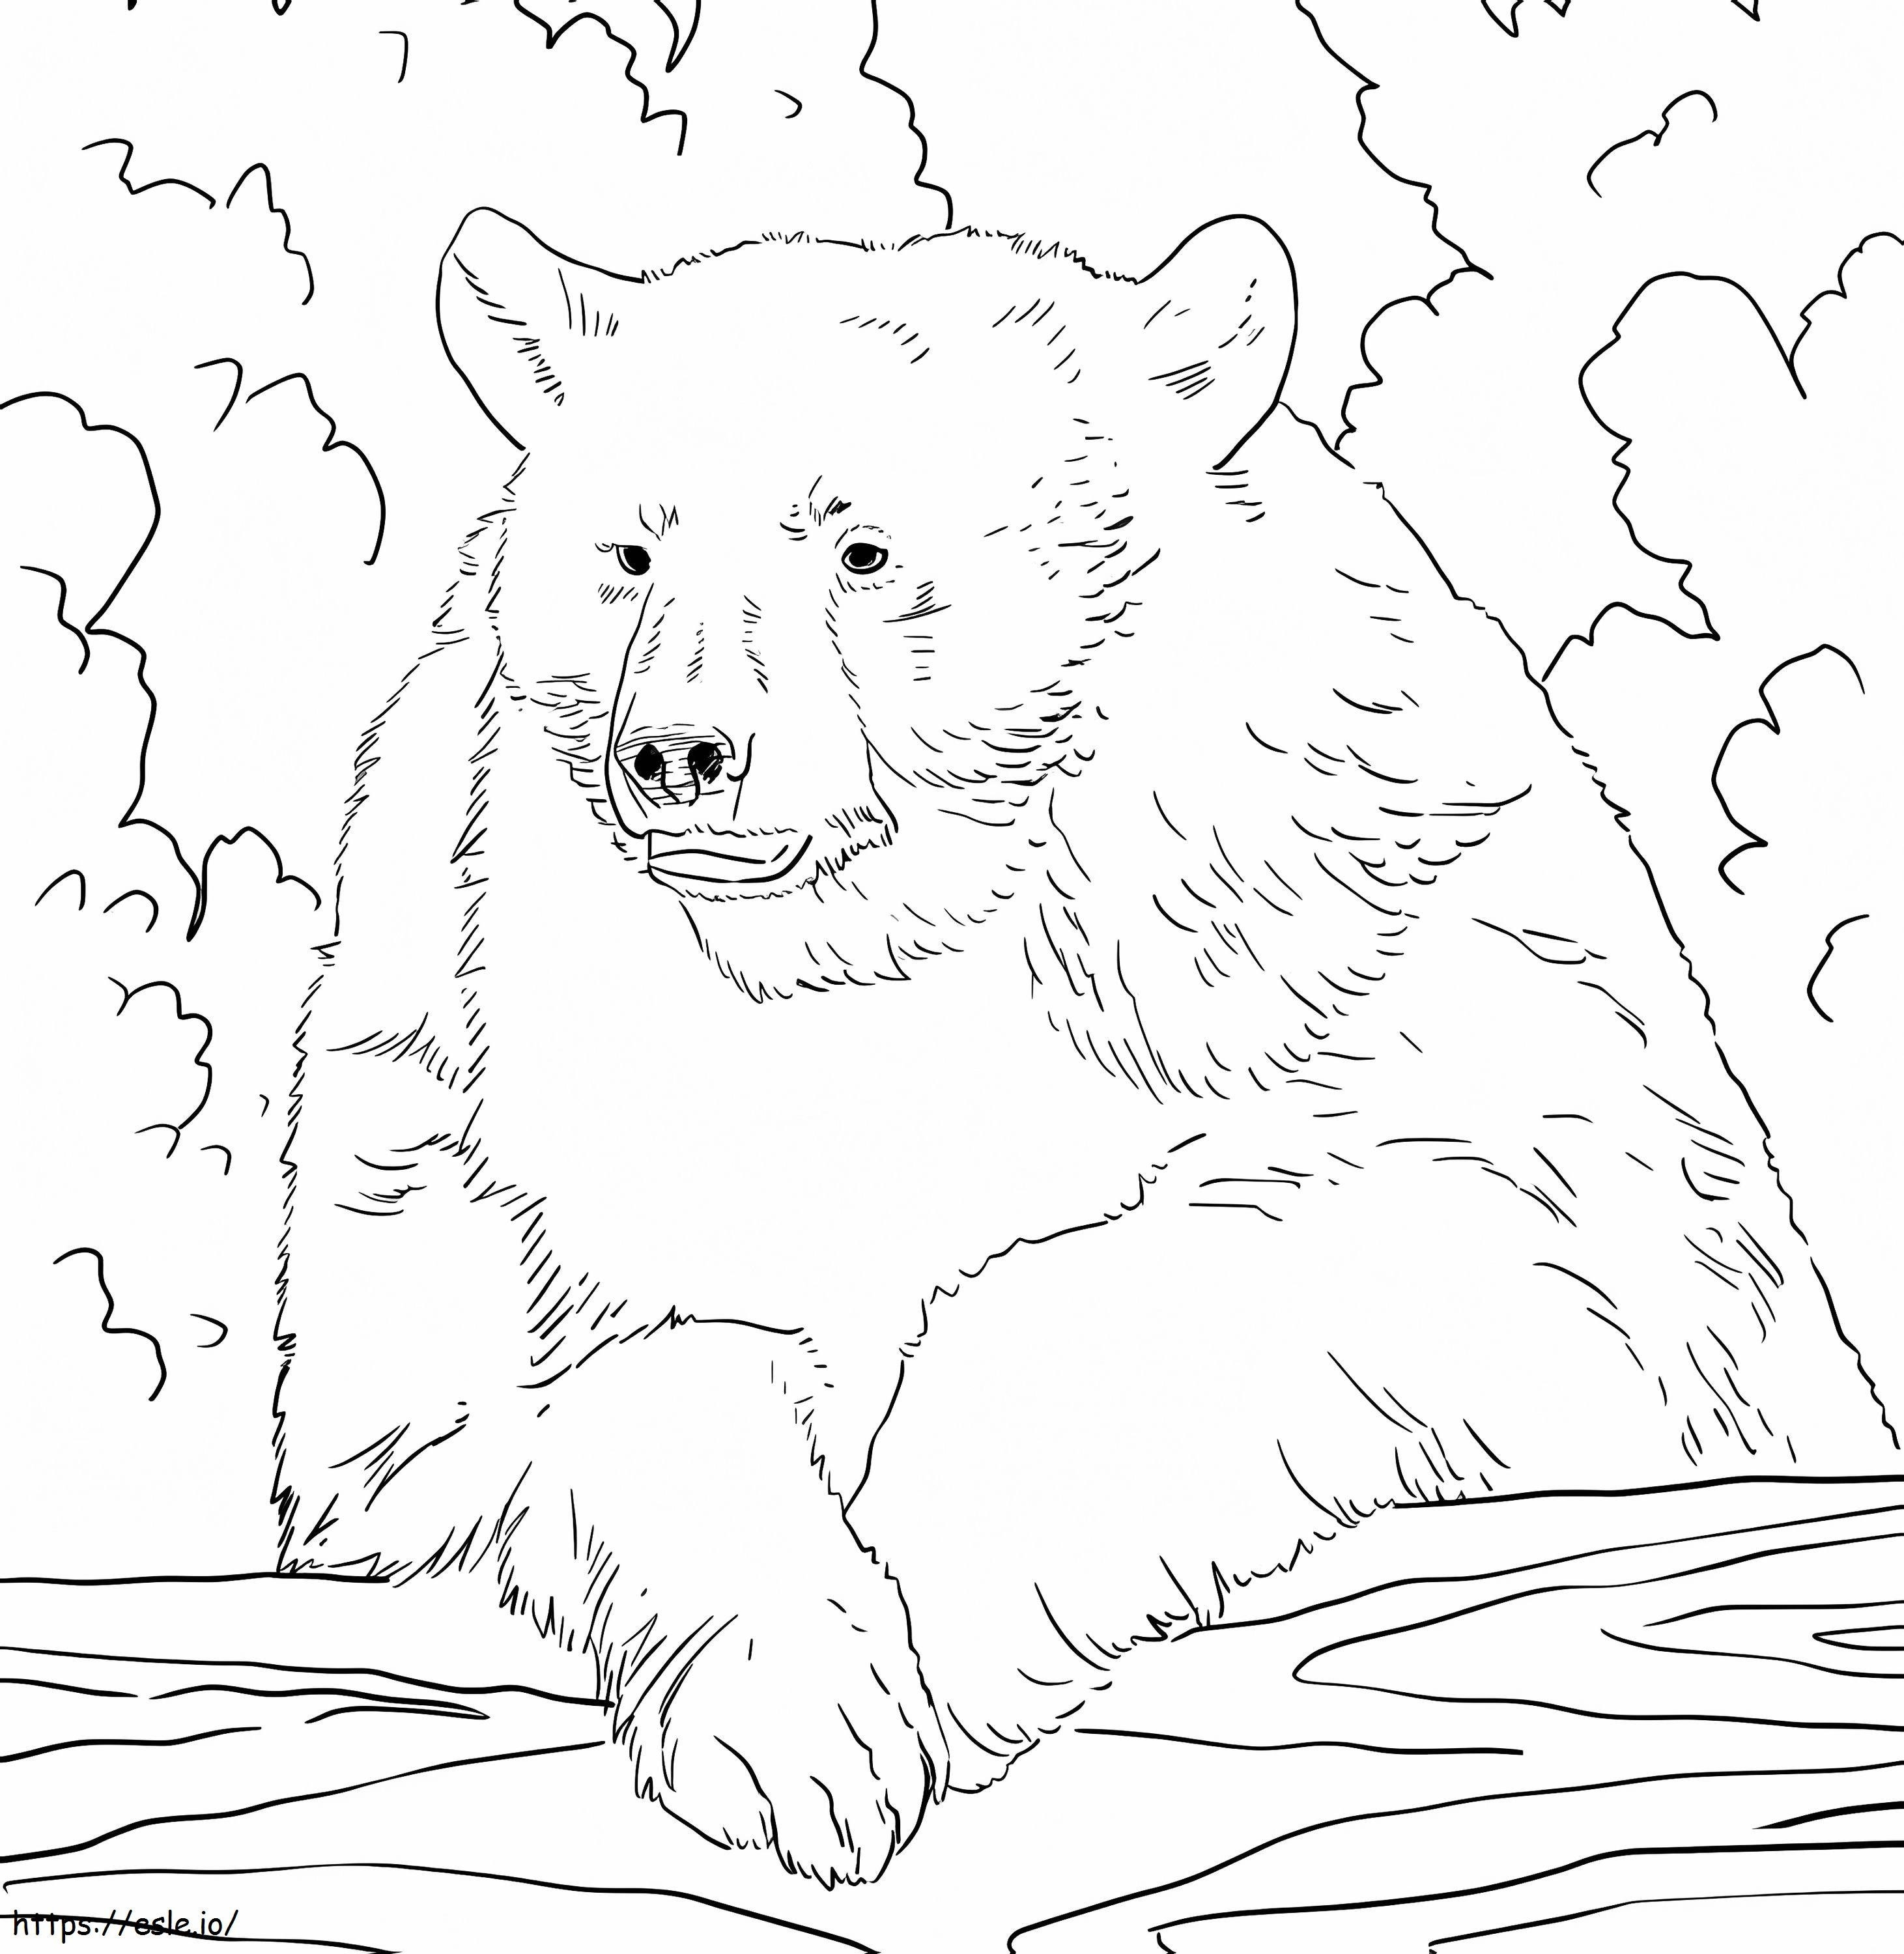 American Black Bear 1 coloring page